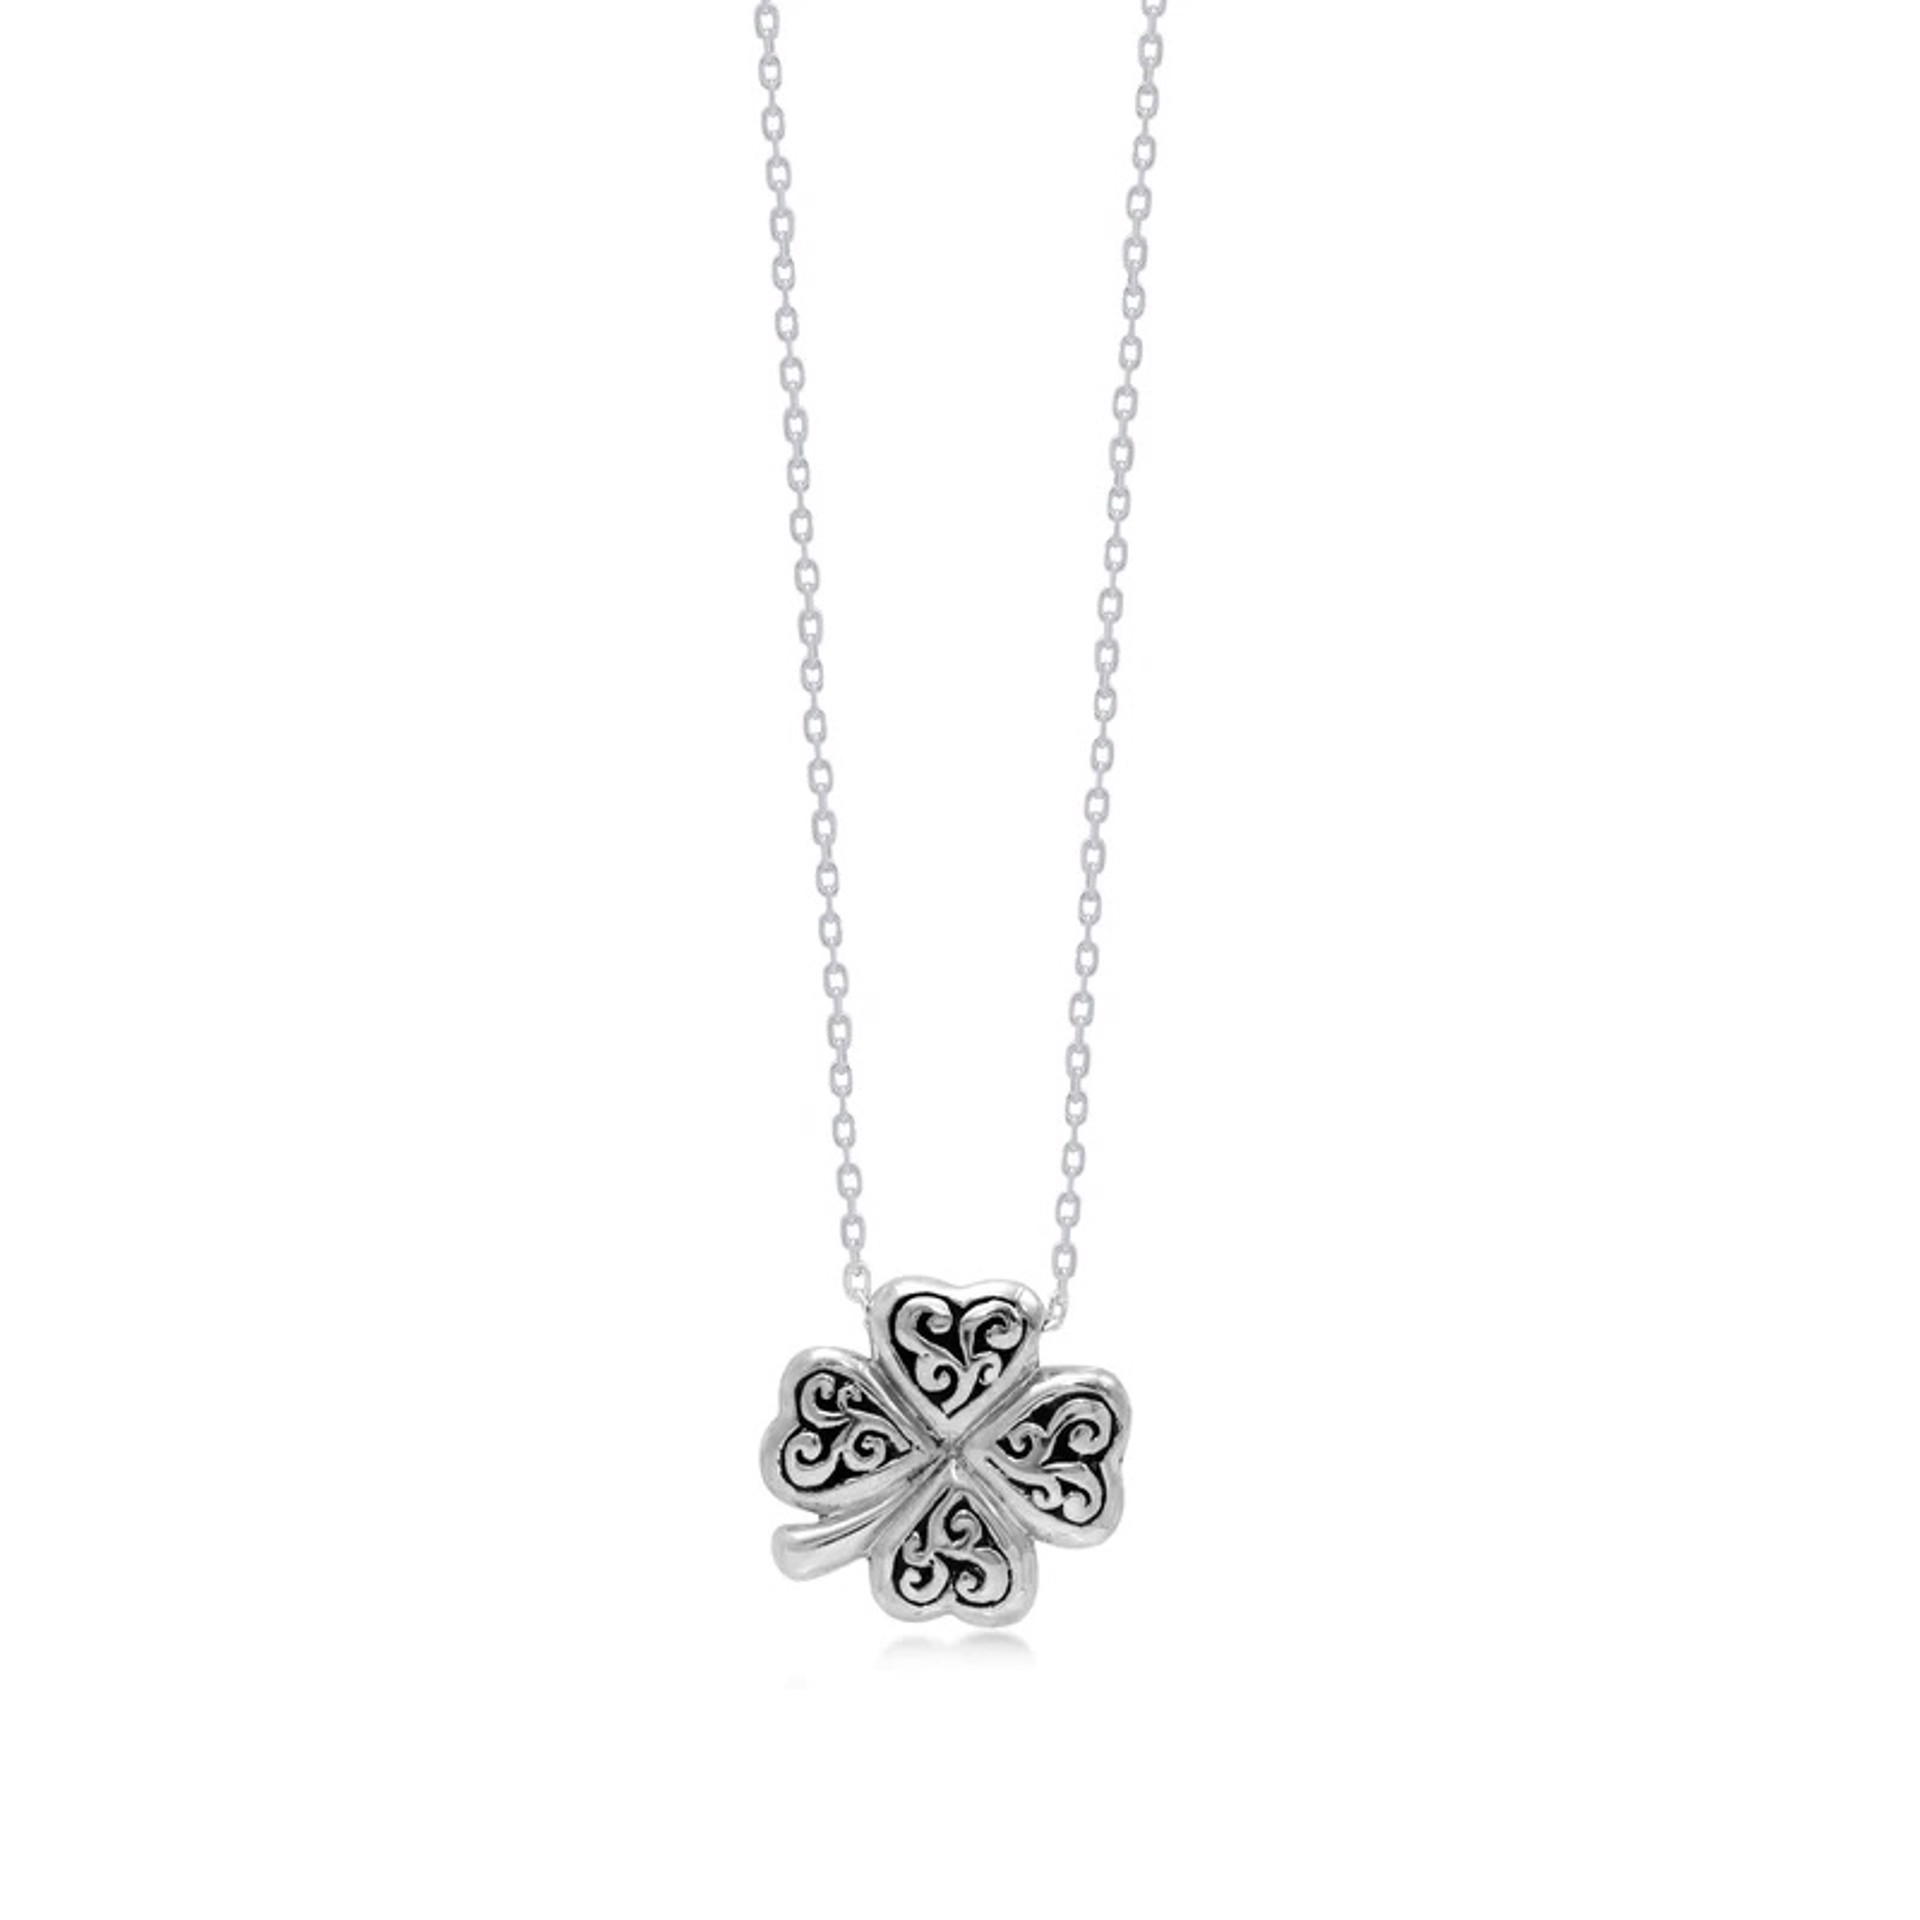 Delicate Clover Leaf Pendant Necklace (SO) by Lois Hill